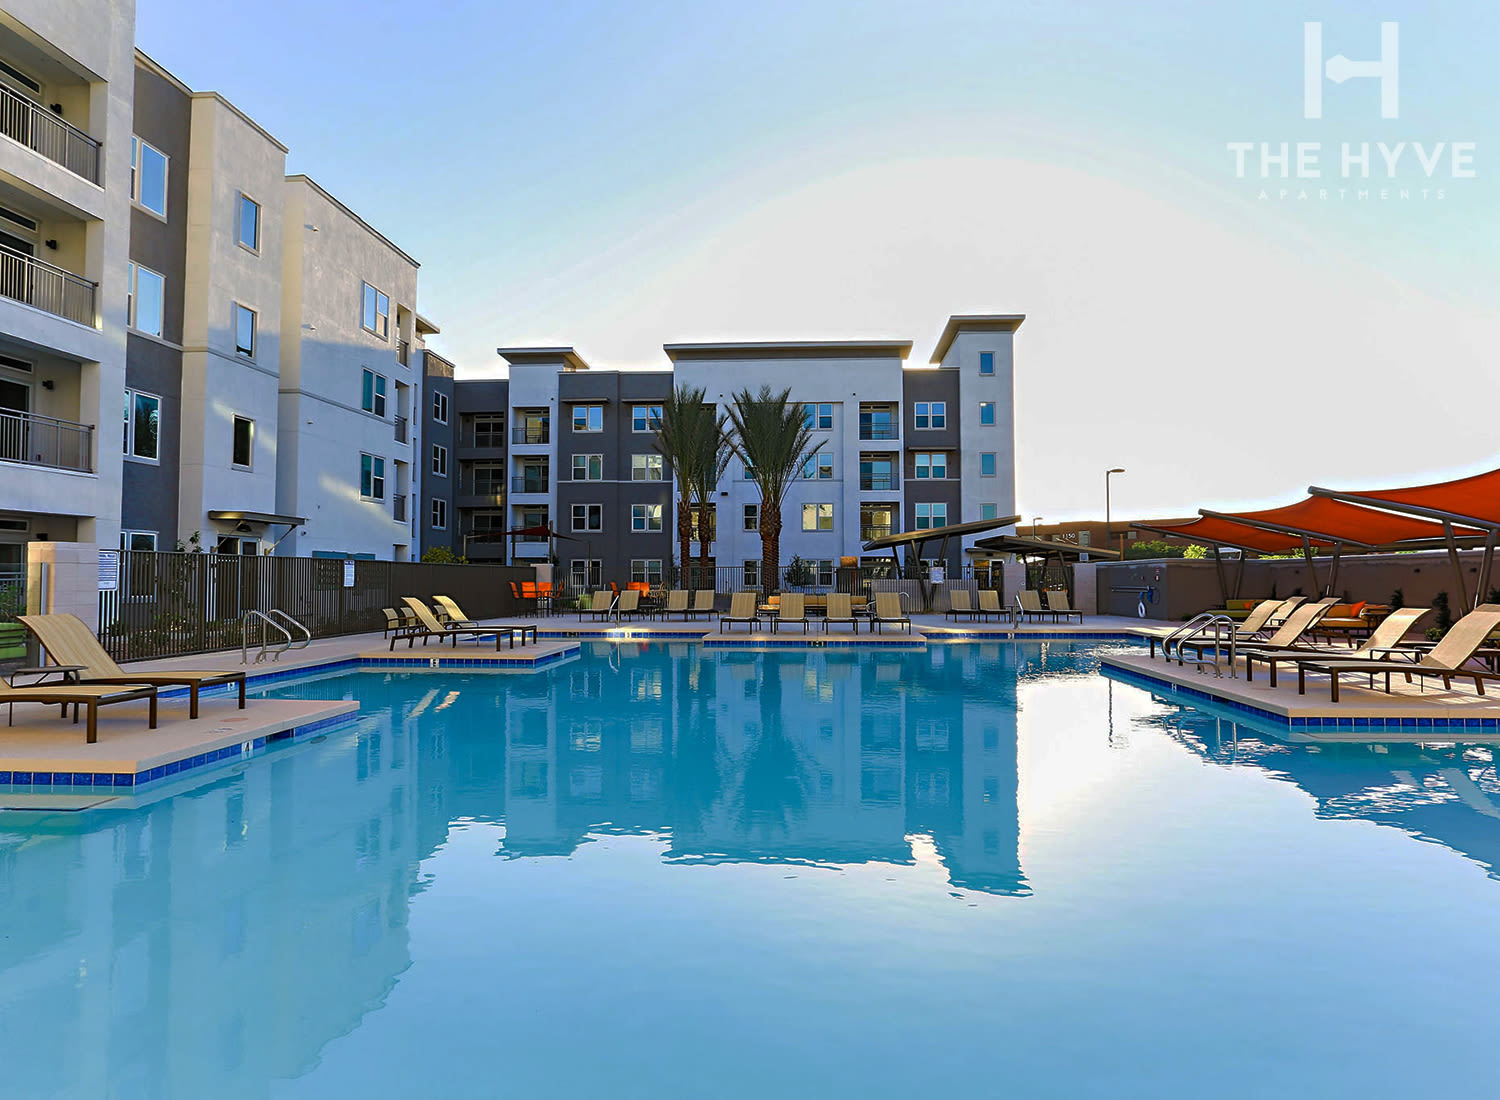 The Hyve apartments in Tempe, Arizona